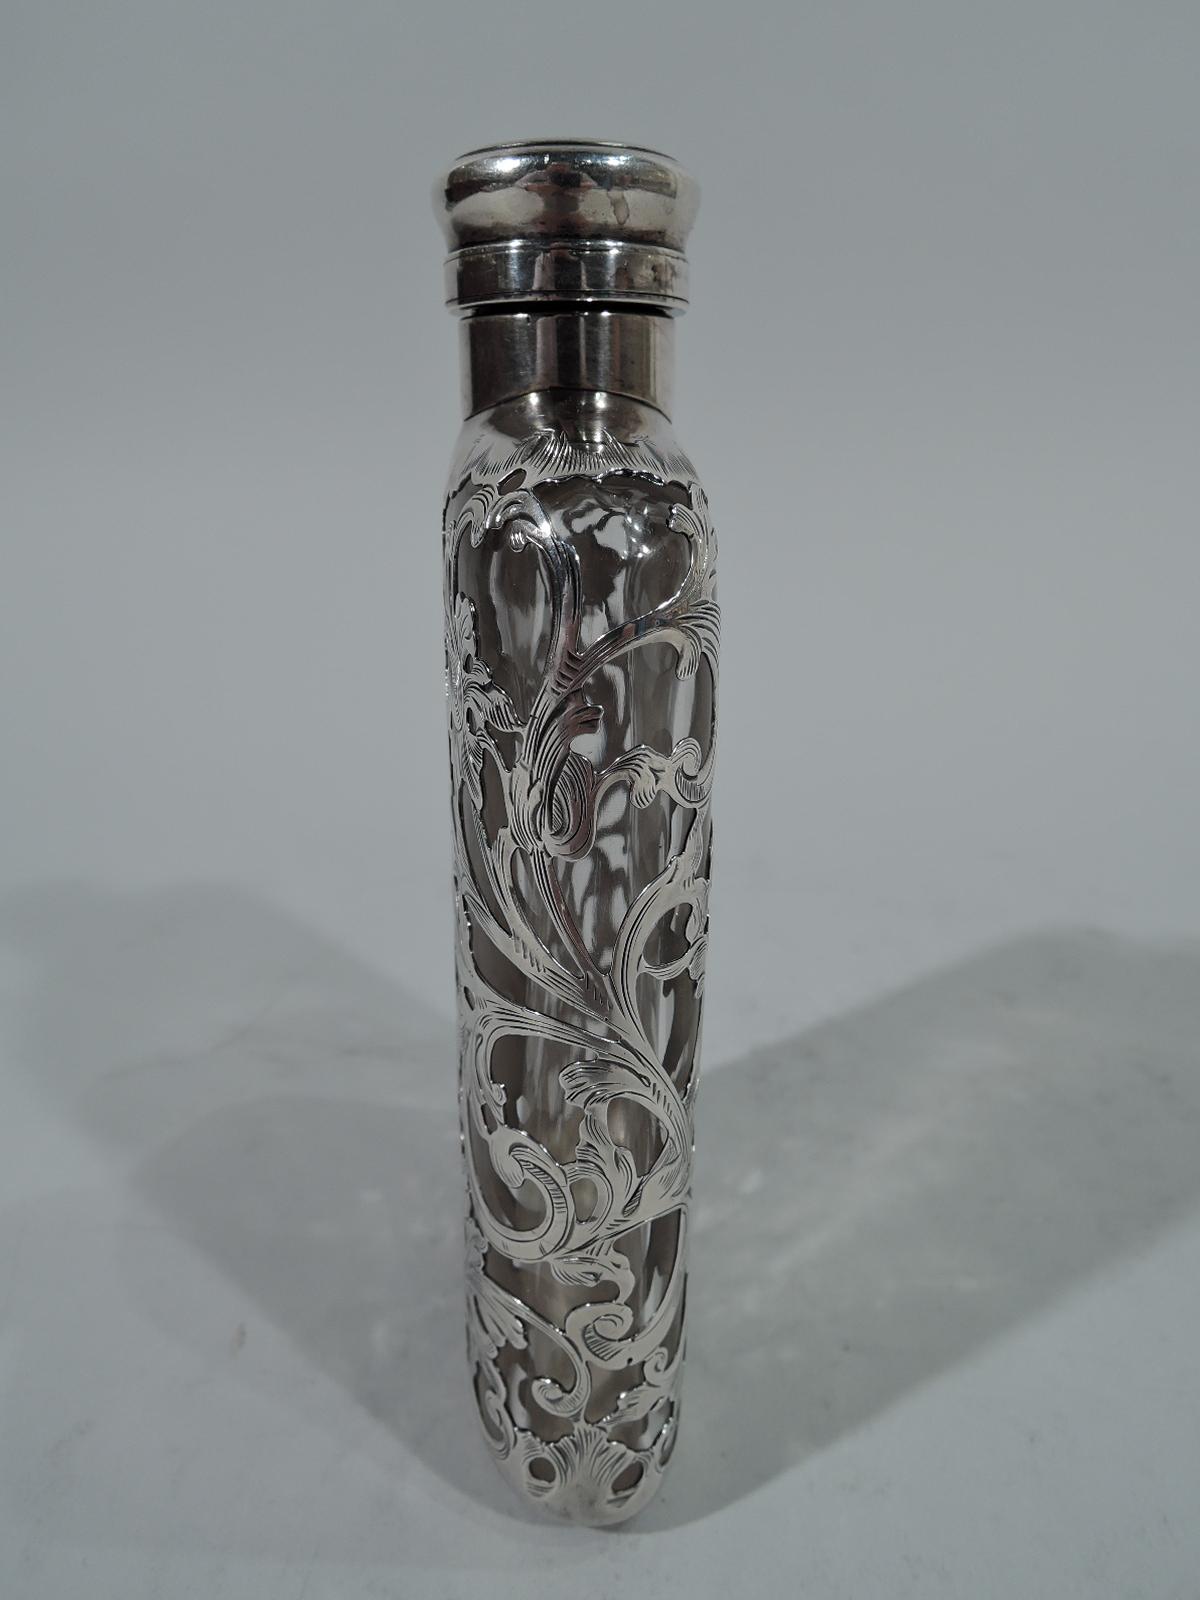 Turn-of-the-century glass flask with silver overlay. Made by Gorham in Providence. Clear glass with all-over silver leafy scrollwork heightened with engraving. On front strapwork cartouche engraved with interlaced script monogram. On back solid